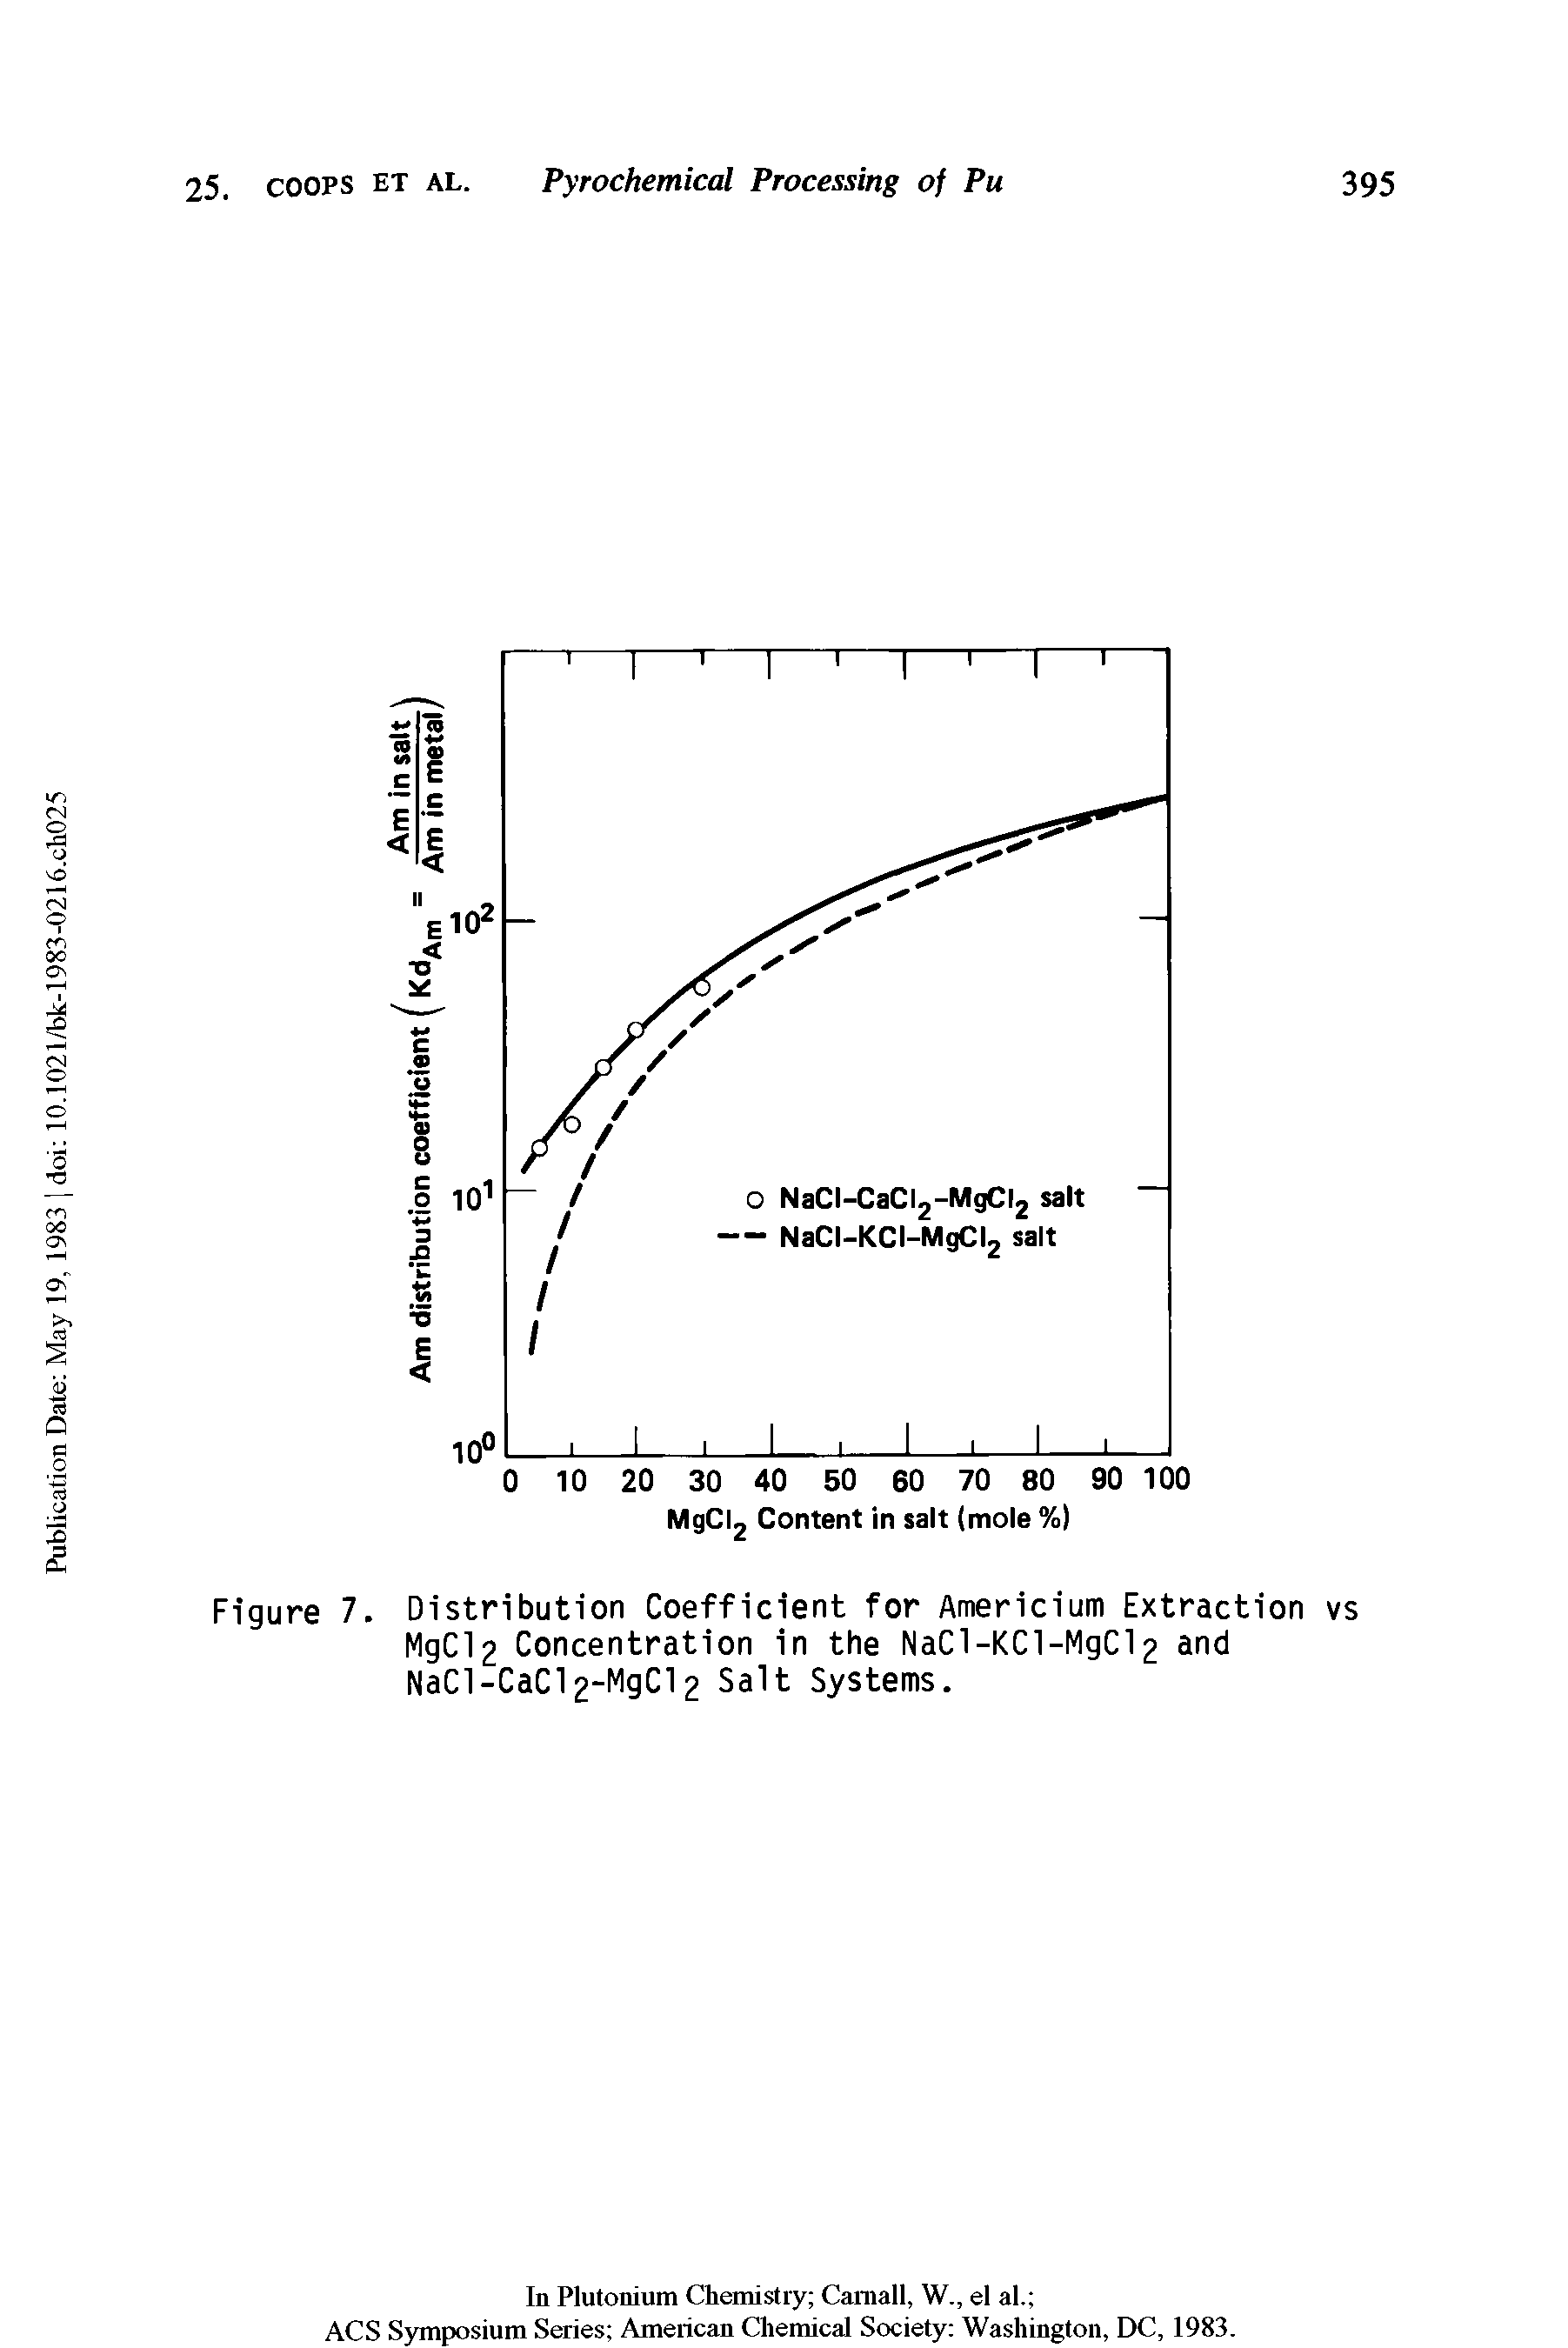 Figure 7. Distribution Coefficient for Americium Extraction vs MgC12 Concentration in the NaCl-KCl-MgCl2 and NaCl-CaCI2 MgC12 Salt Systems.